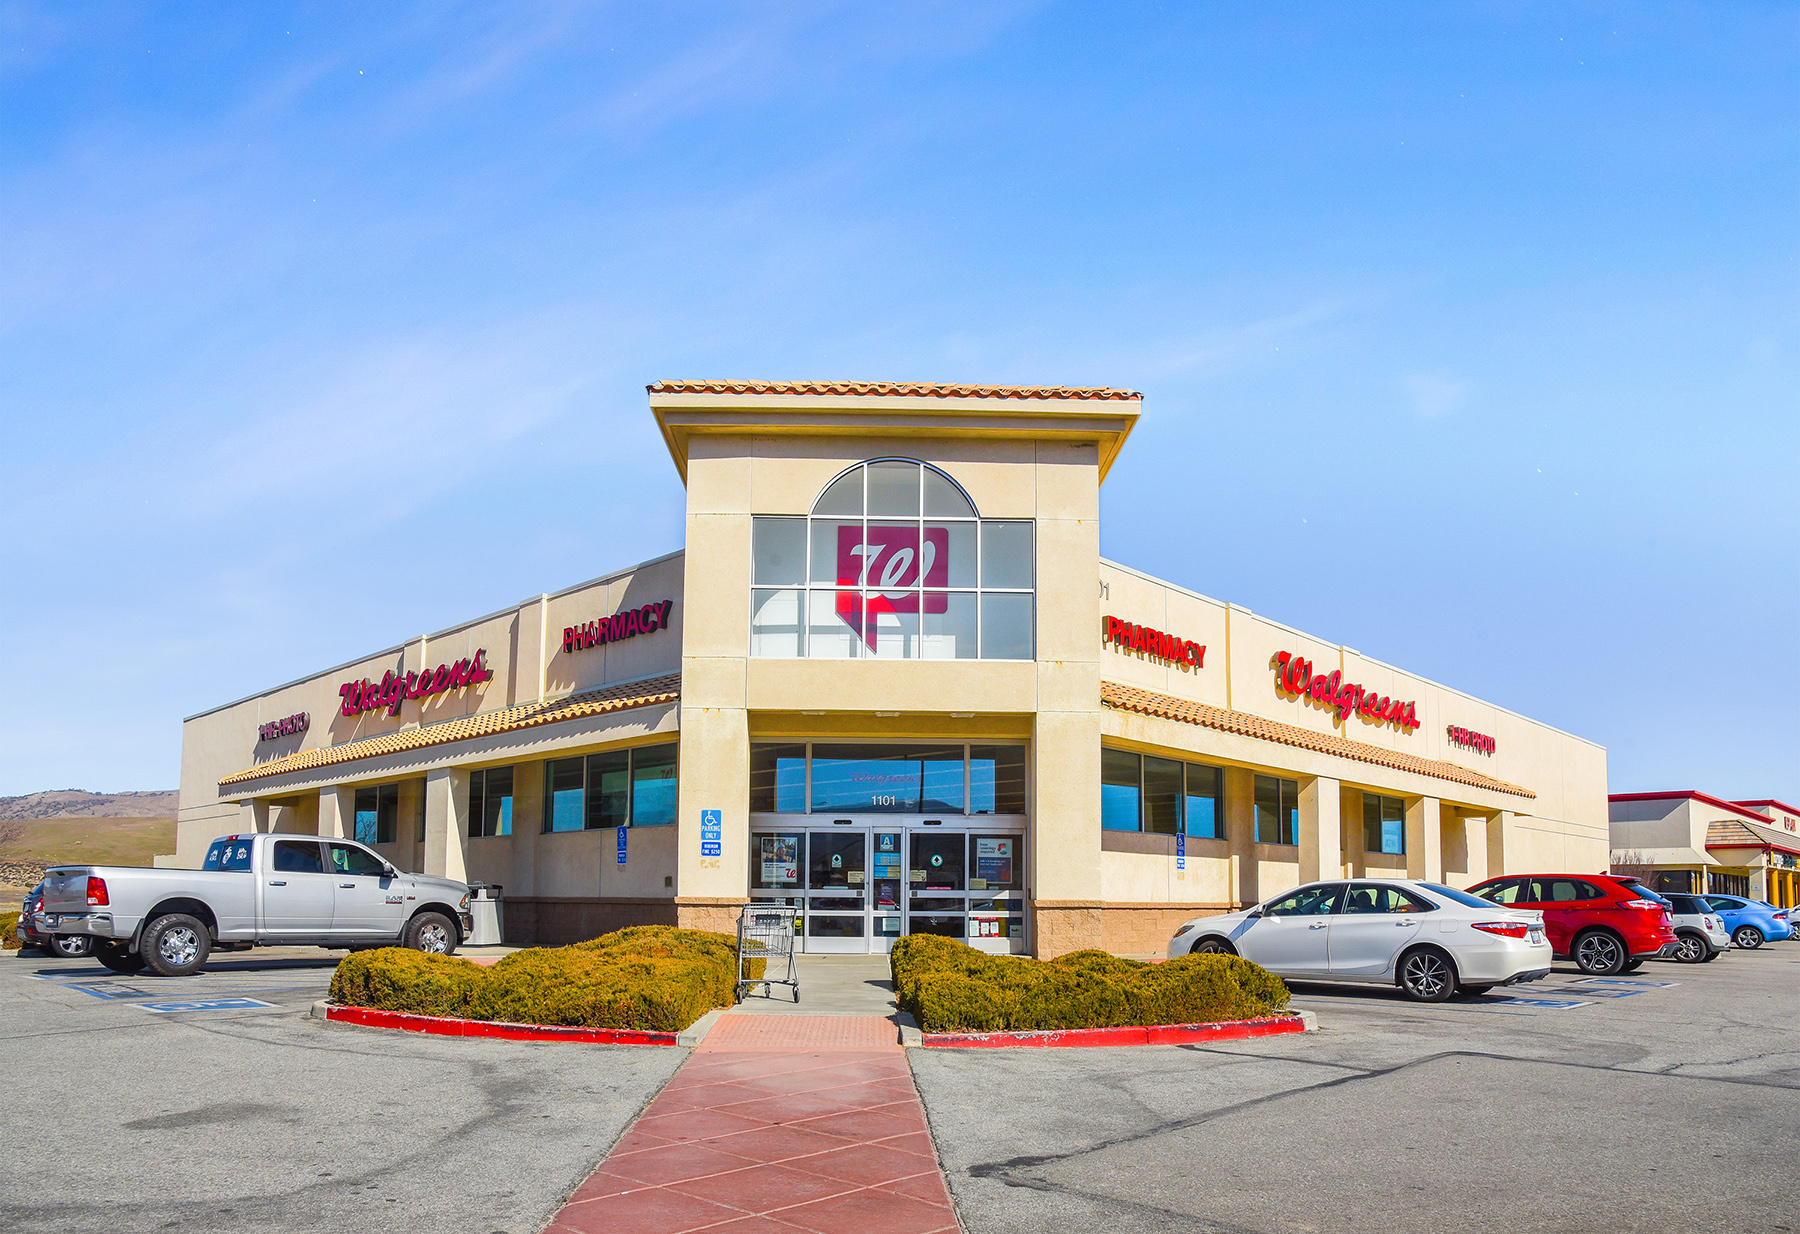 Hanley Investment Group Arranges Sale of Single-Tenant Walgreens in Kern County, Calif. for $6.4 Million 